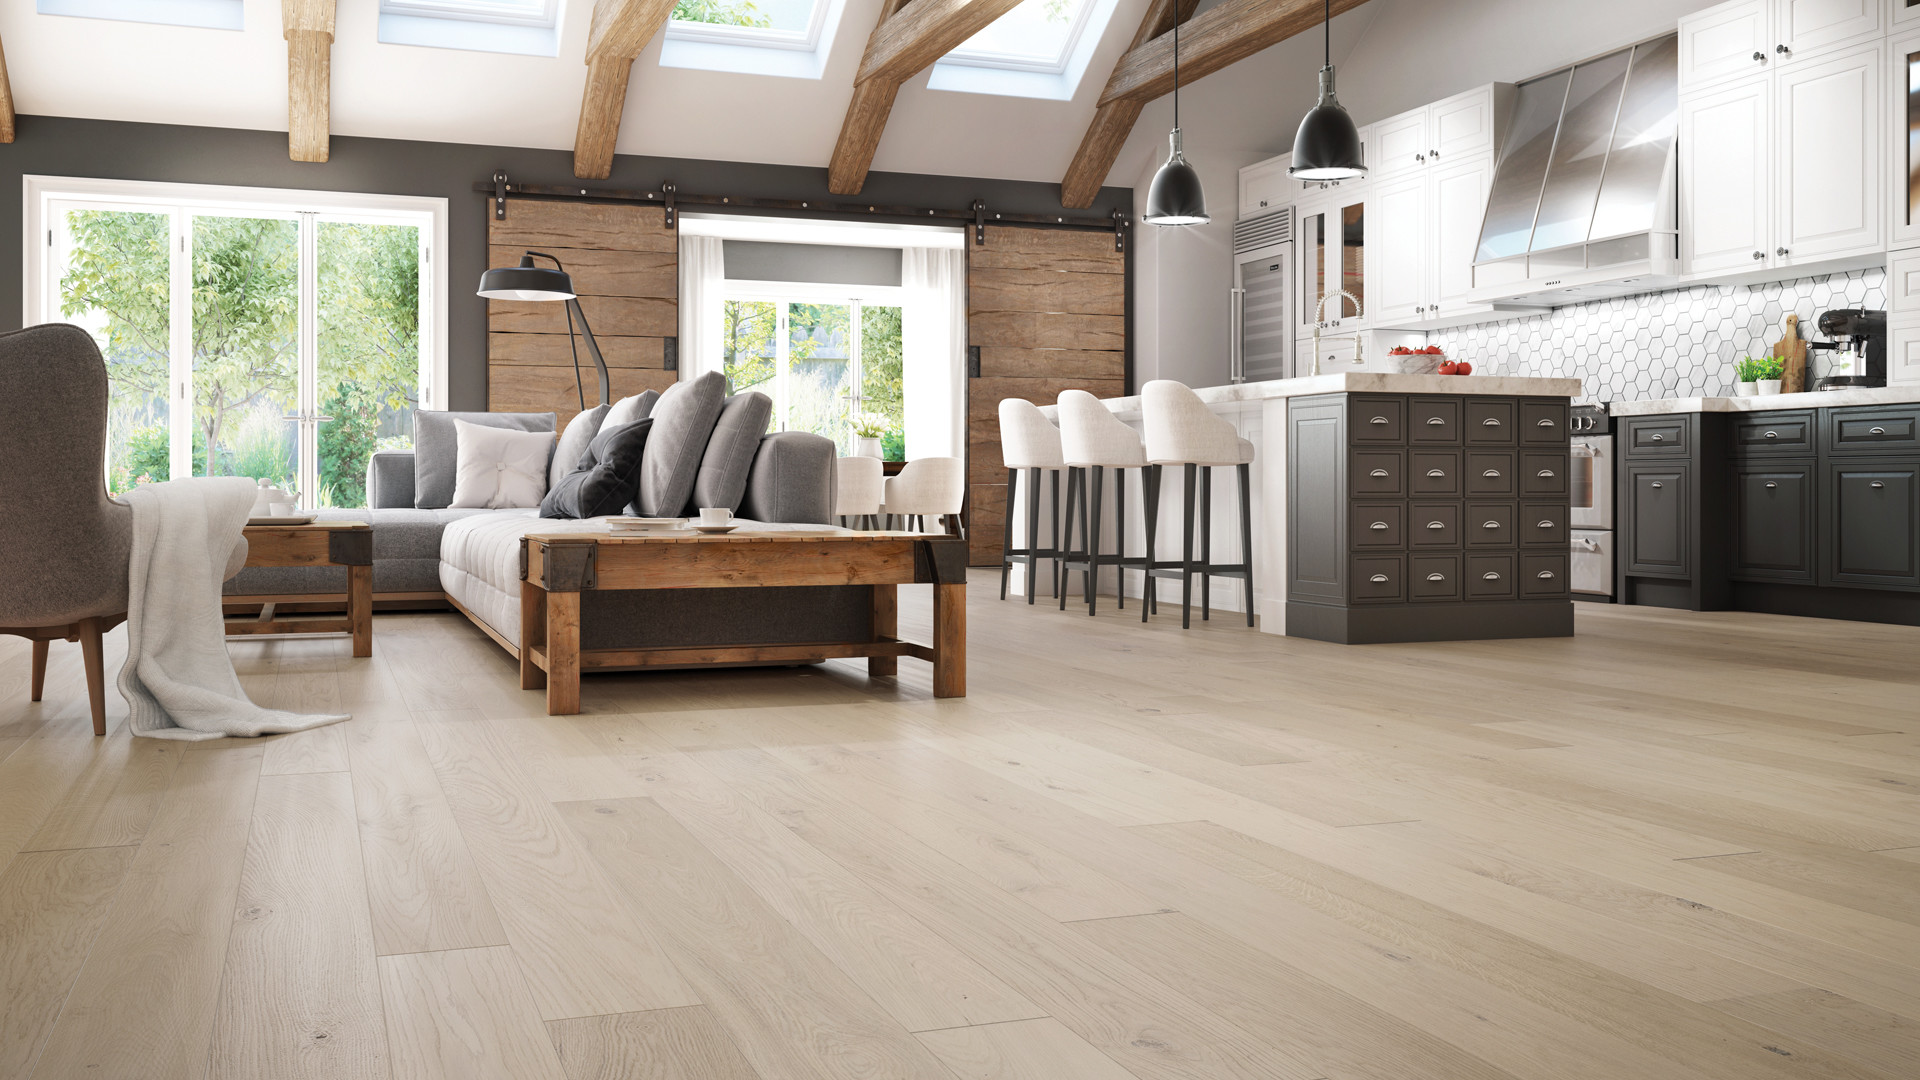 Most Popular Engineered Hardwood Flooring Color Of 4 Latest Hardwood Flooring Trends Of 2018 Lauzon Flooring With This Technology Brings Your Hardwood Floors And Well Being To A New Level By 